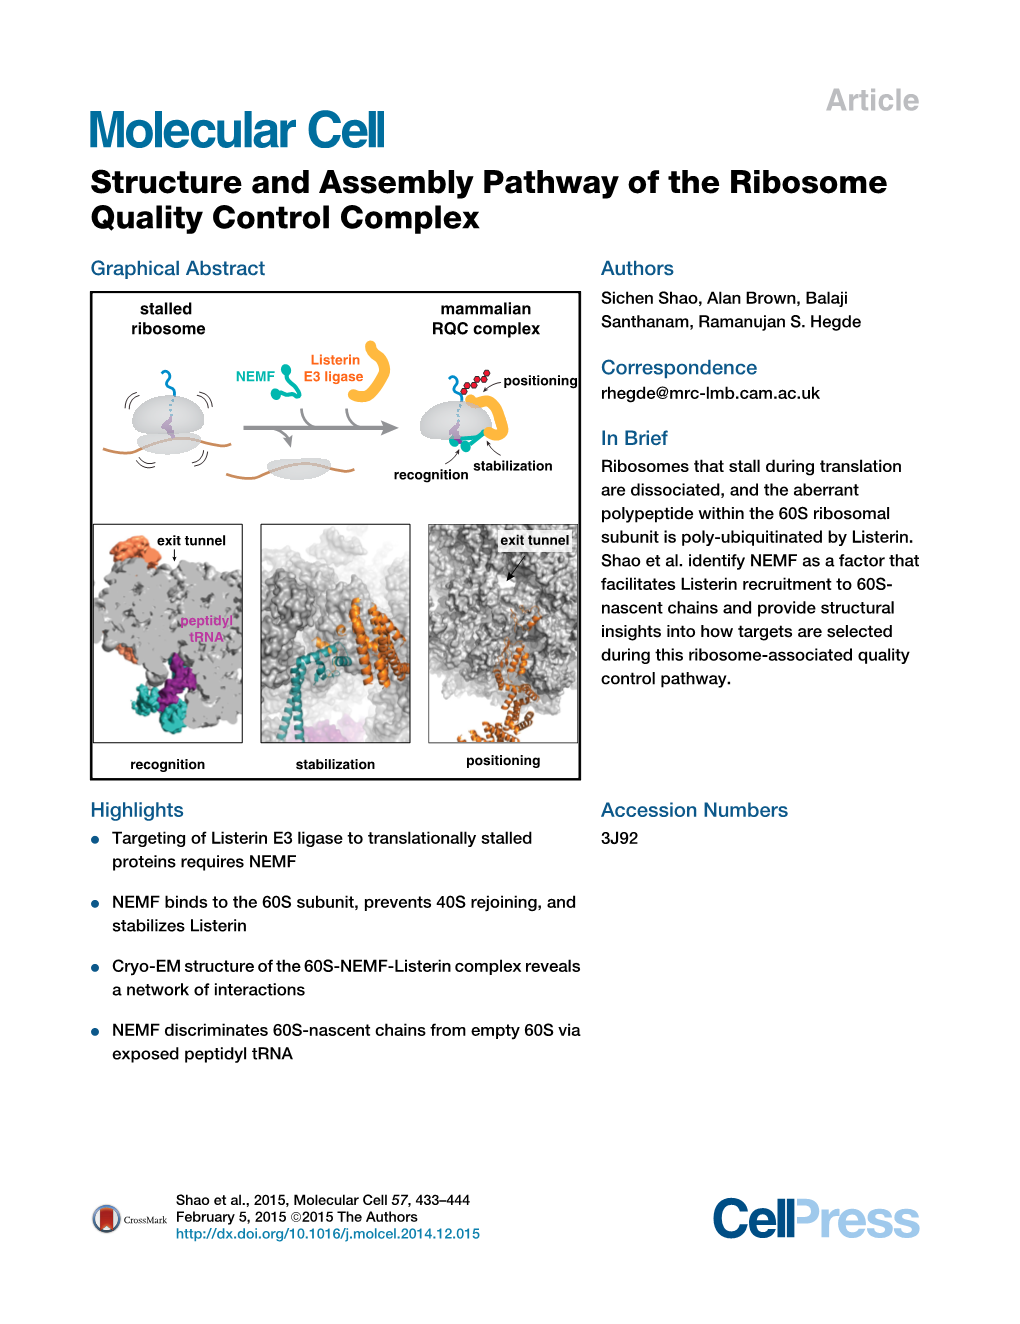 Structure and Assembly Pathway of the Ribosome Quality Control Complex